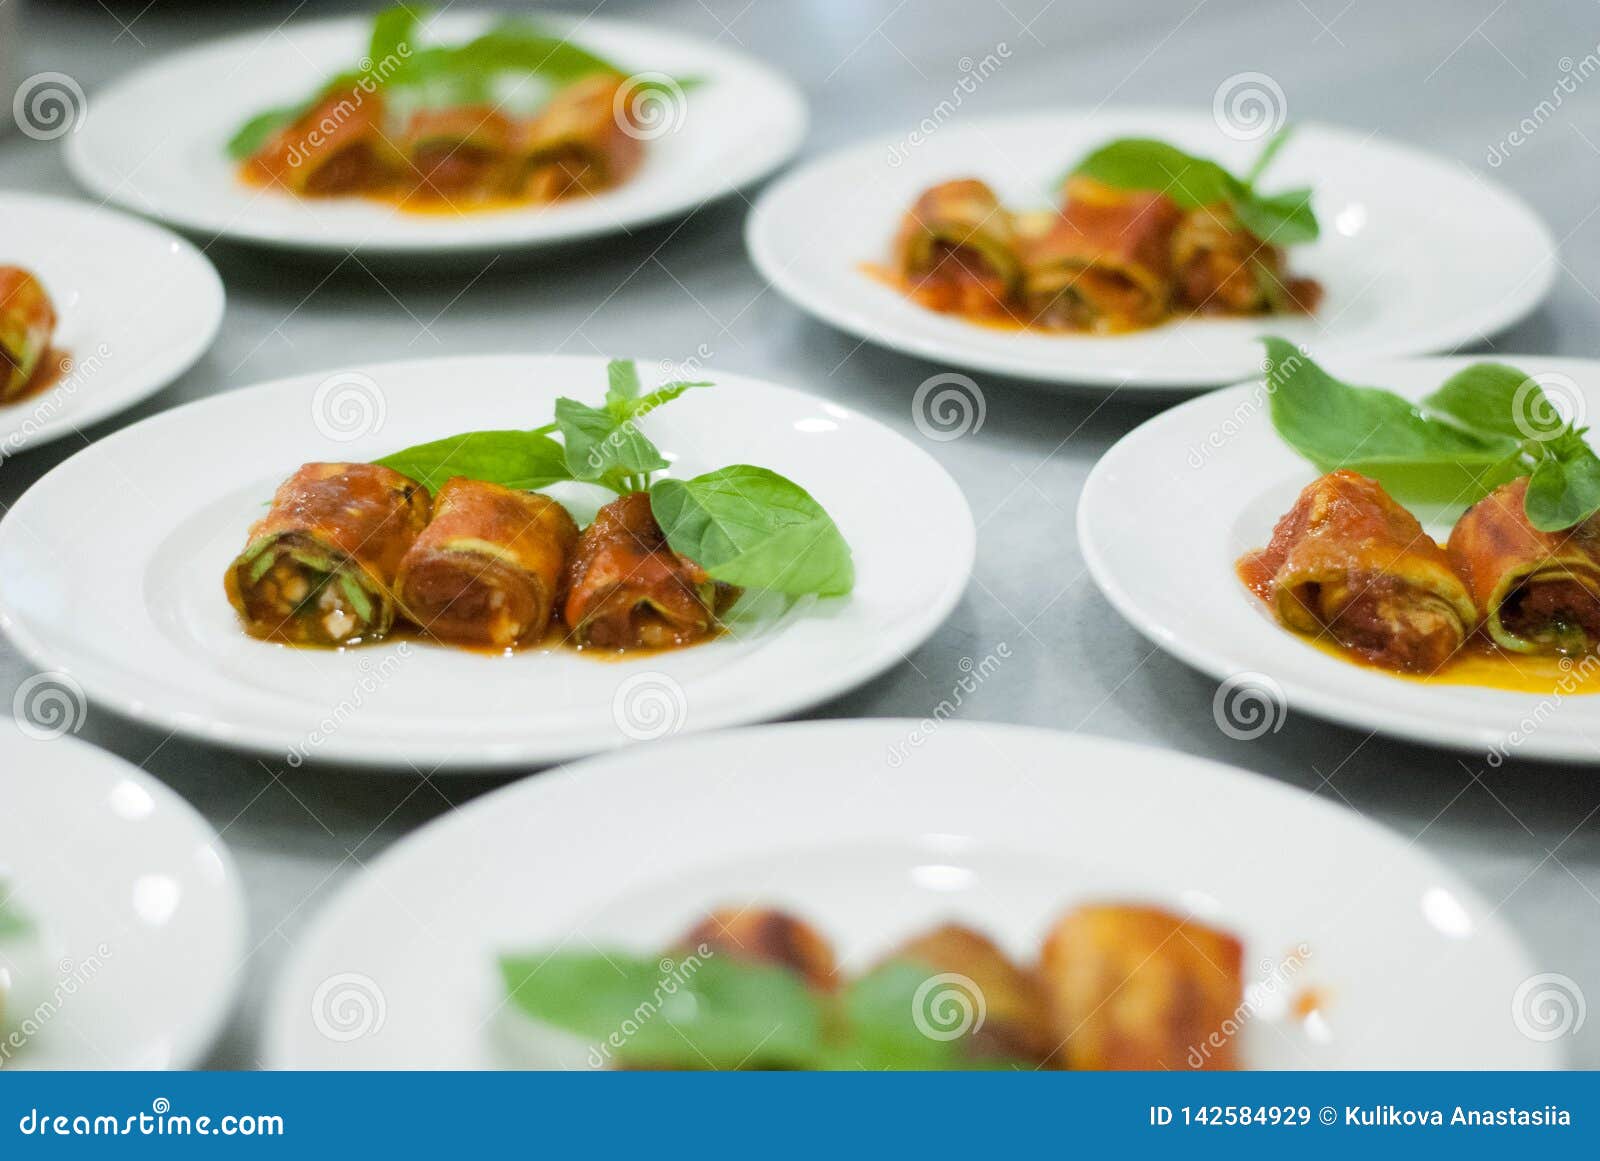 Involtini from Zucchini. Pesto Sauce and Dried Tomatoes Stock Image ...